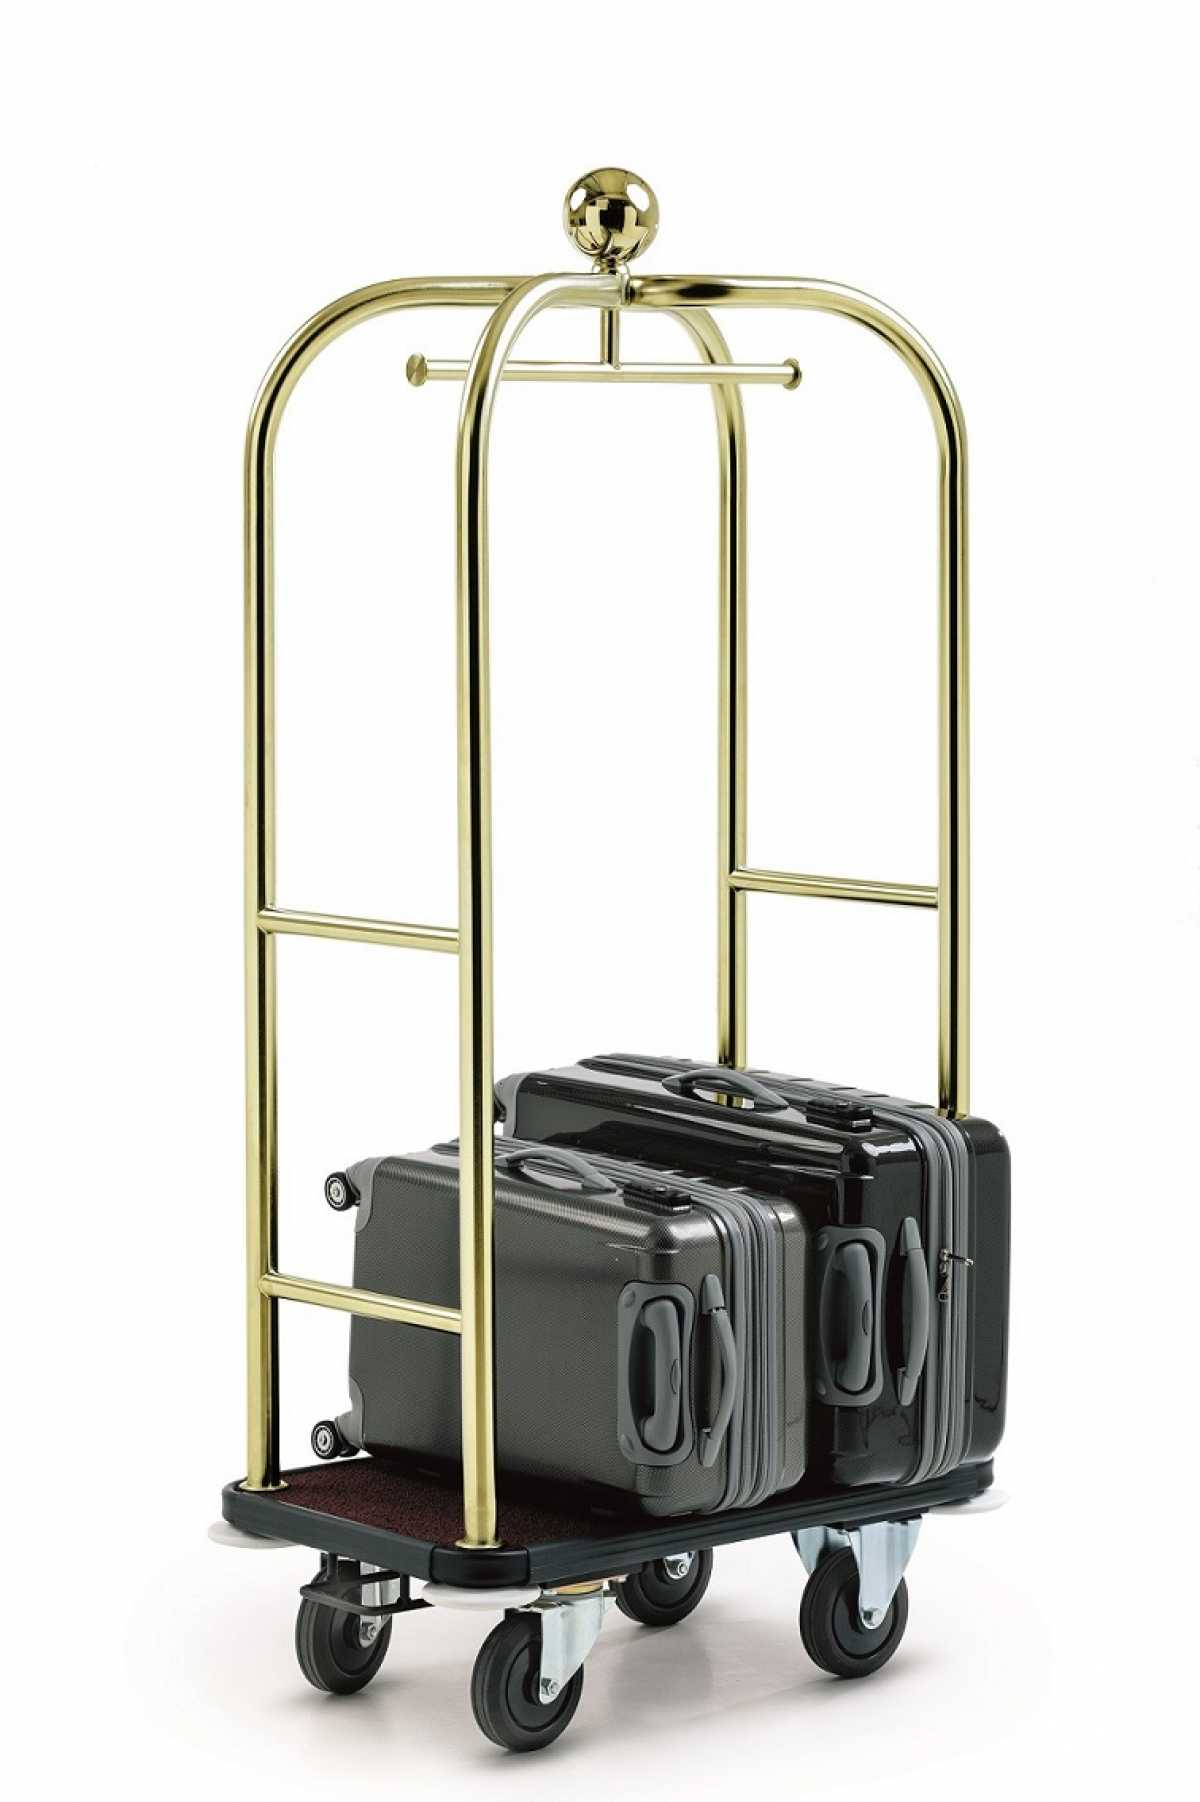 WANZL Luggage Collection Trolley GS-Lobby XS, Gold-plated stainless steel